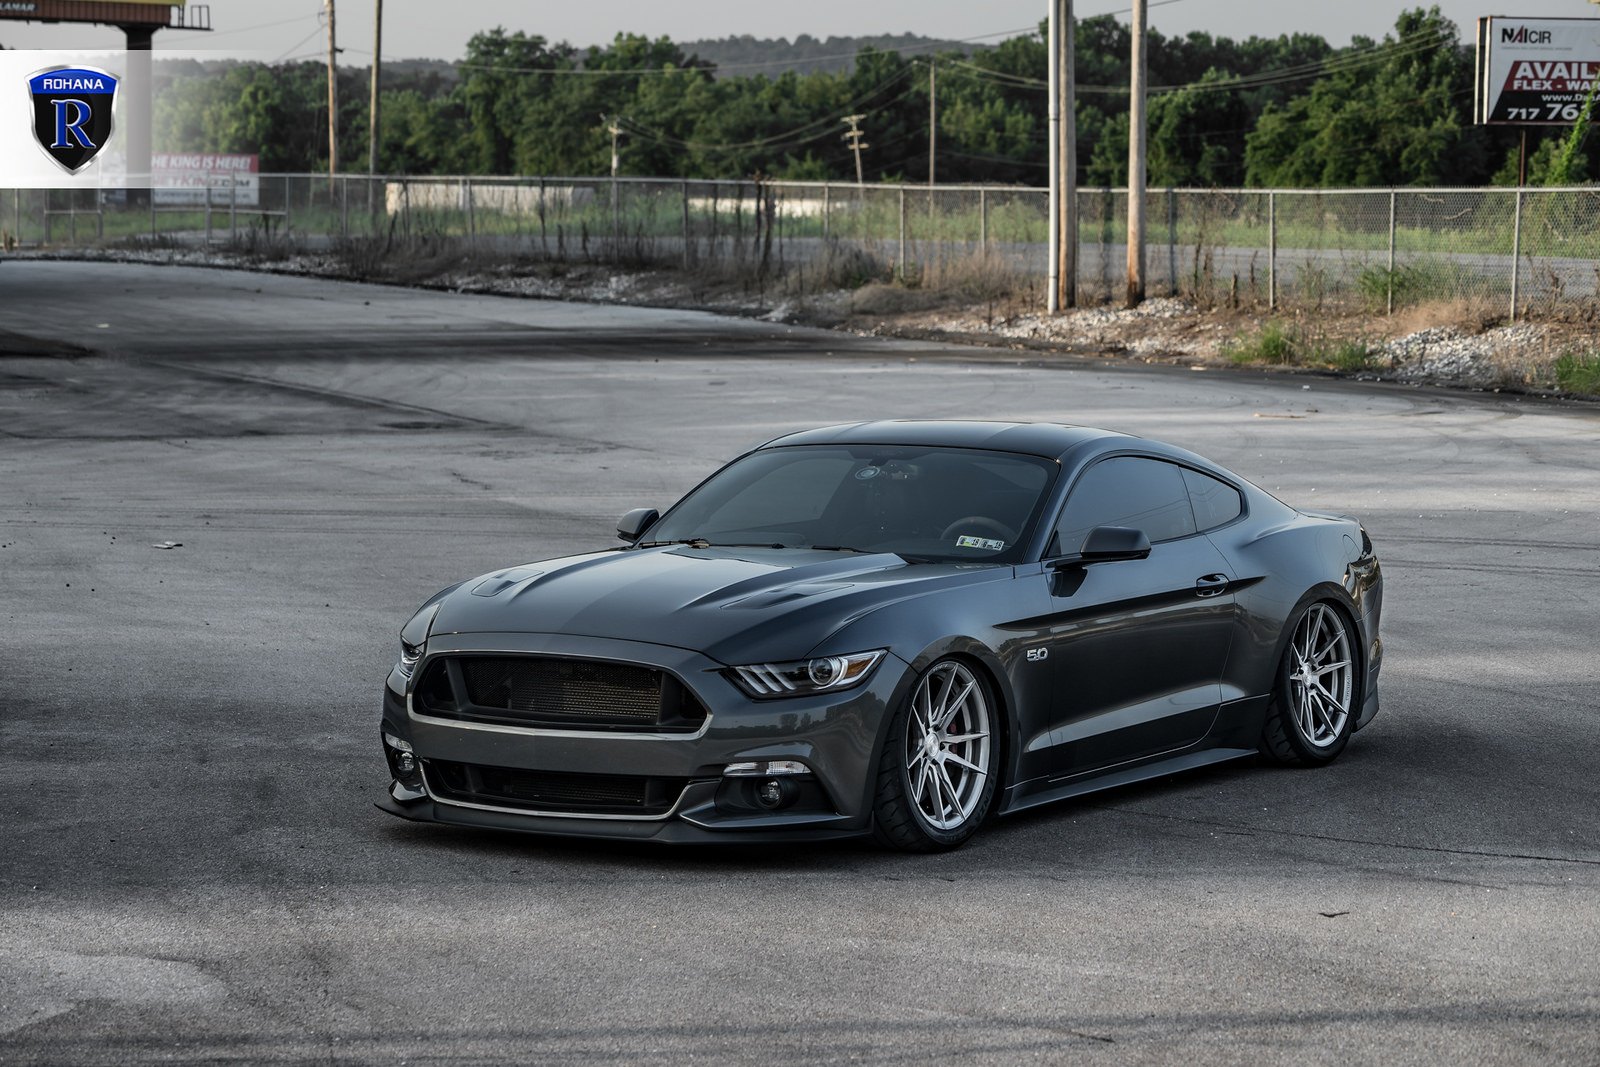 Aftermarket Headlights on Gray Ford Mustang 5.0 - Photo by Rohana Wheels